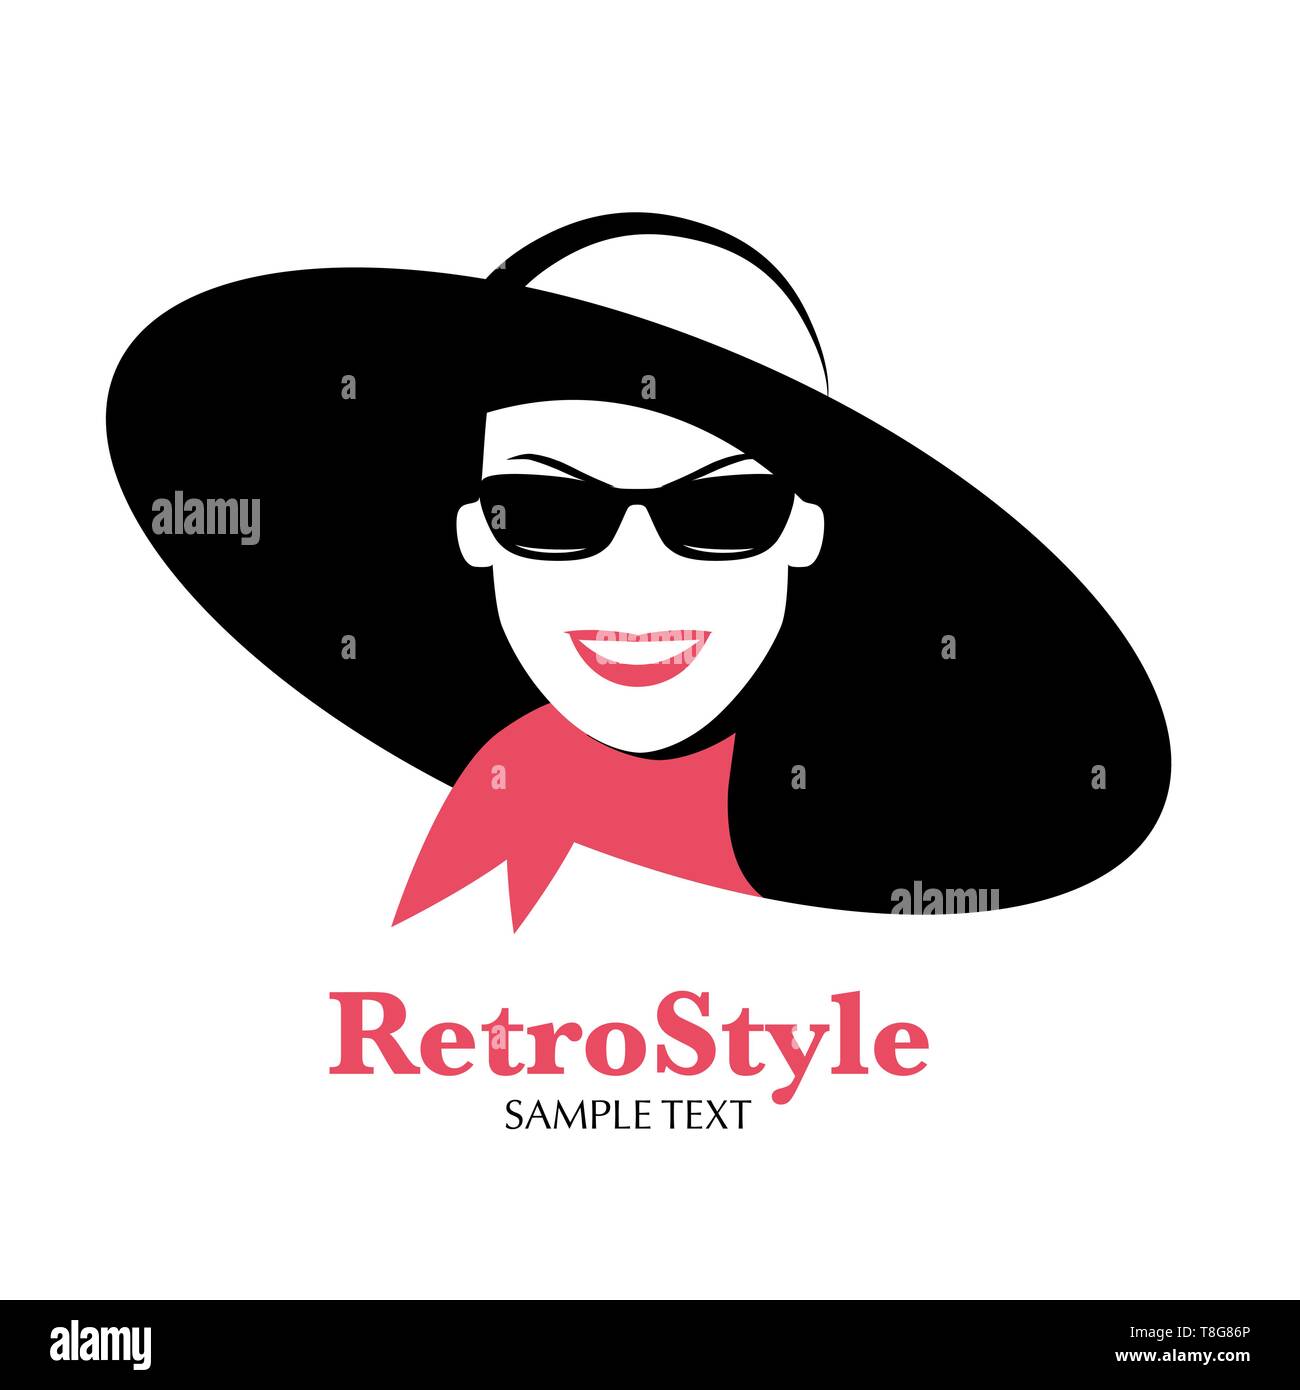 Icon or avatar of smiling woman with hat, sunglasses and headscarf in retro style, isolated on white background Stock Vector